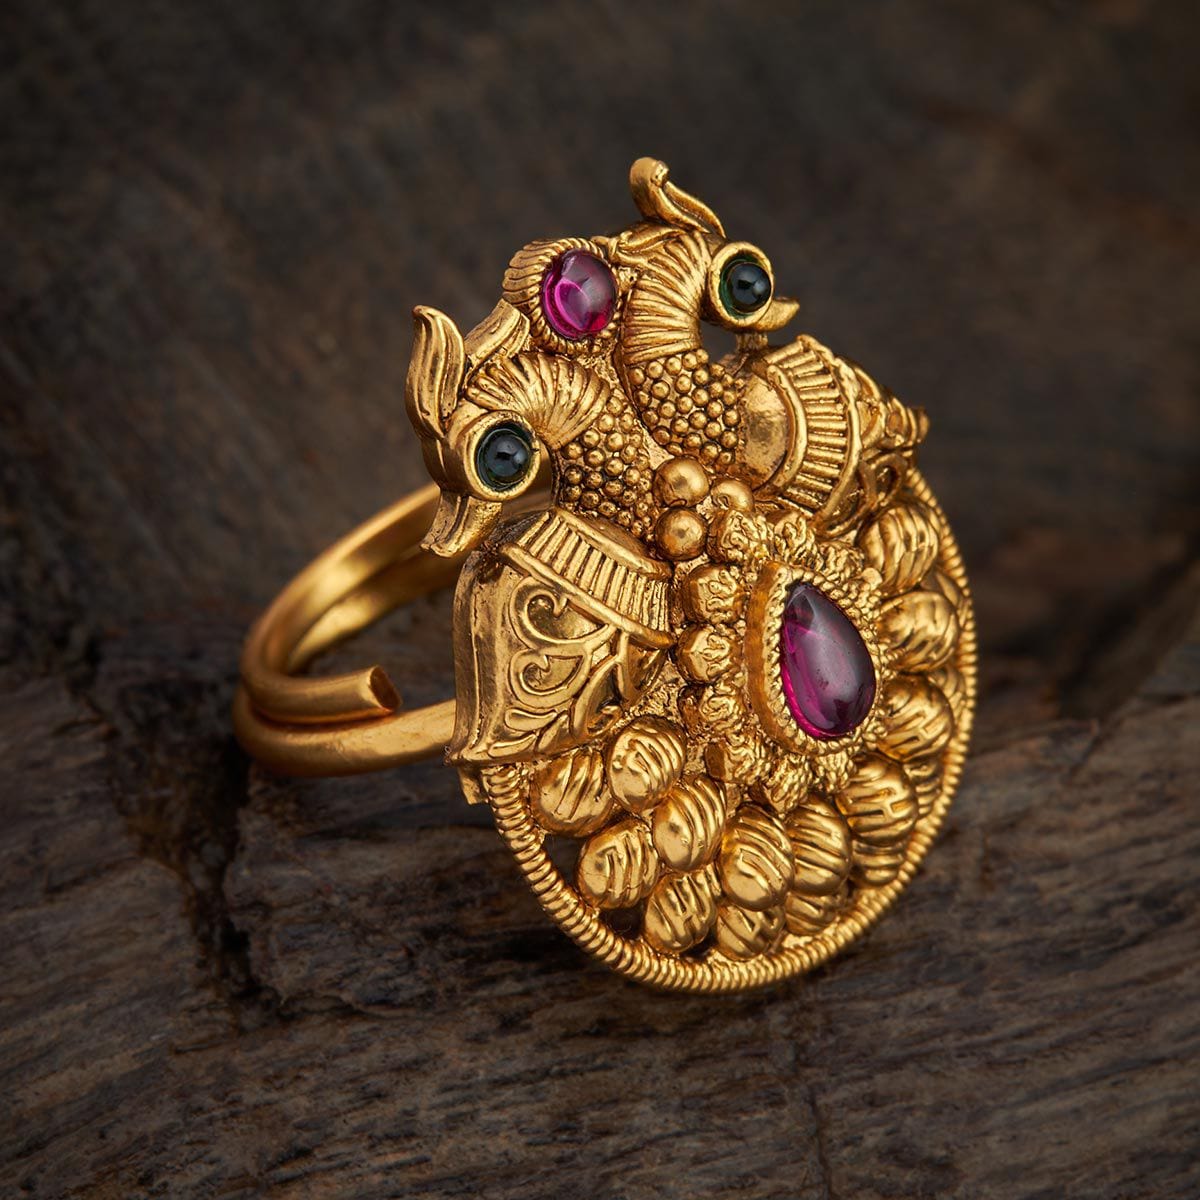 Adjustable antique gold ring/ Statement Jewelry/ Statement Ring/ Indian Ring/  Pakistani Ring/ Indian Gold Ring/ Finger Ring | Gold rings jewelry design,  Gold earrings models, Antique gold rings